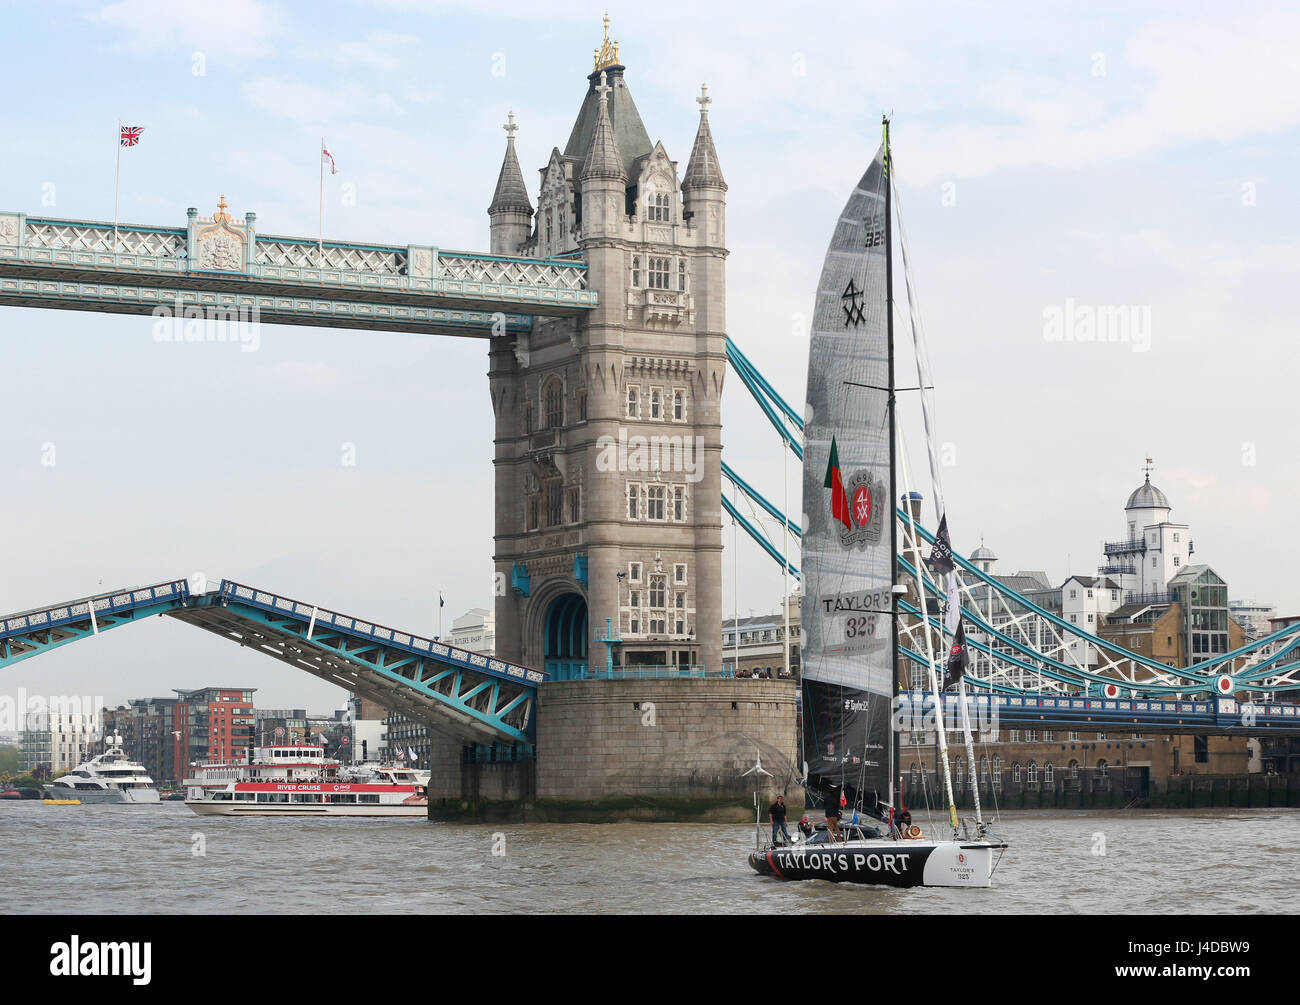 Solo sailor, Ricardo Diniz sails the Taylor325 yacht through Tower Bridge, which has been lifted especially, as he recreates the first shipment of Taylor's Port to London in celebration of the brands 325th anniversary. Stock Photo